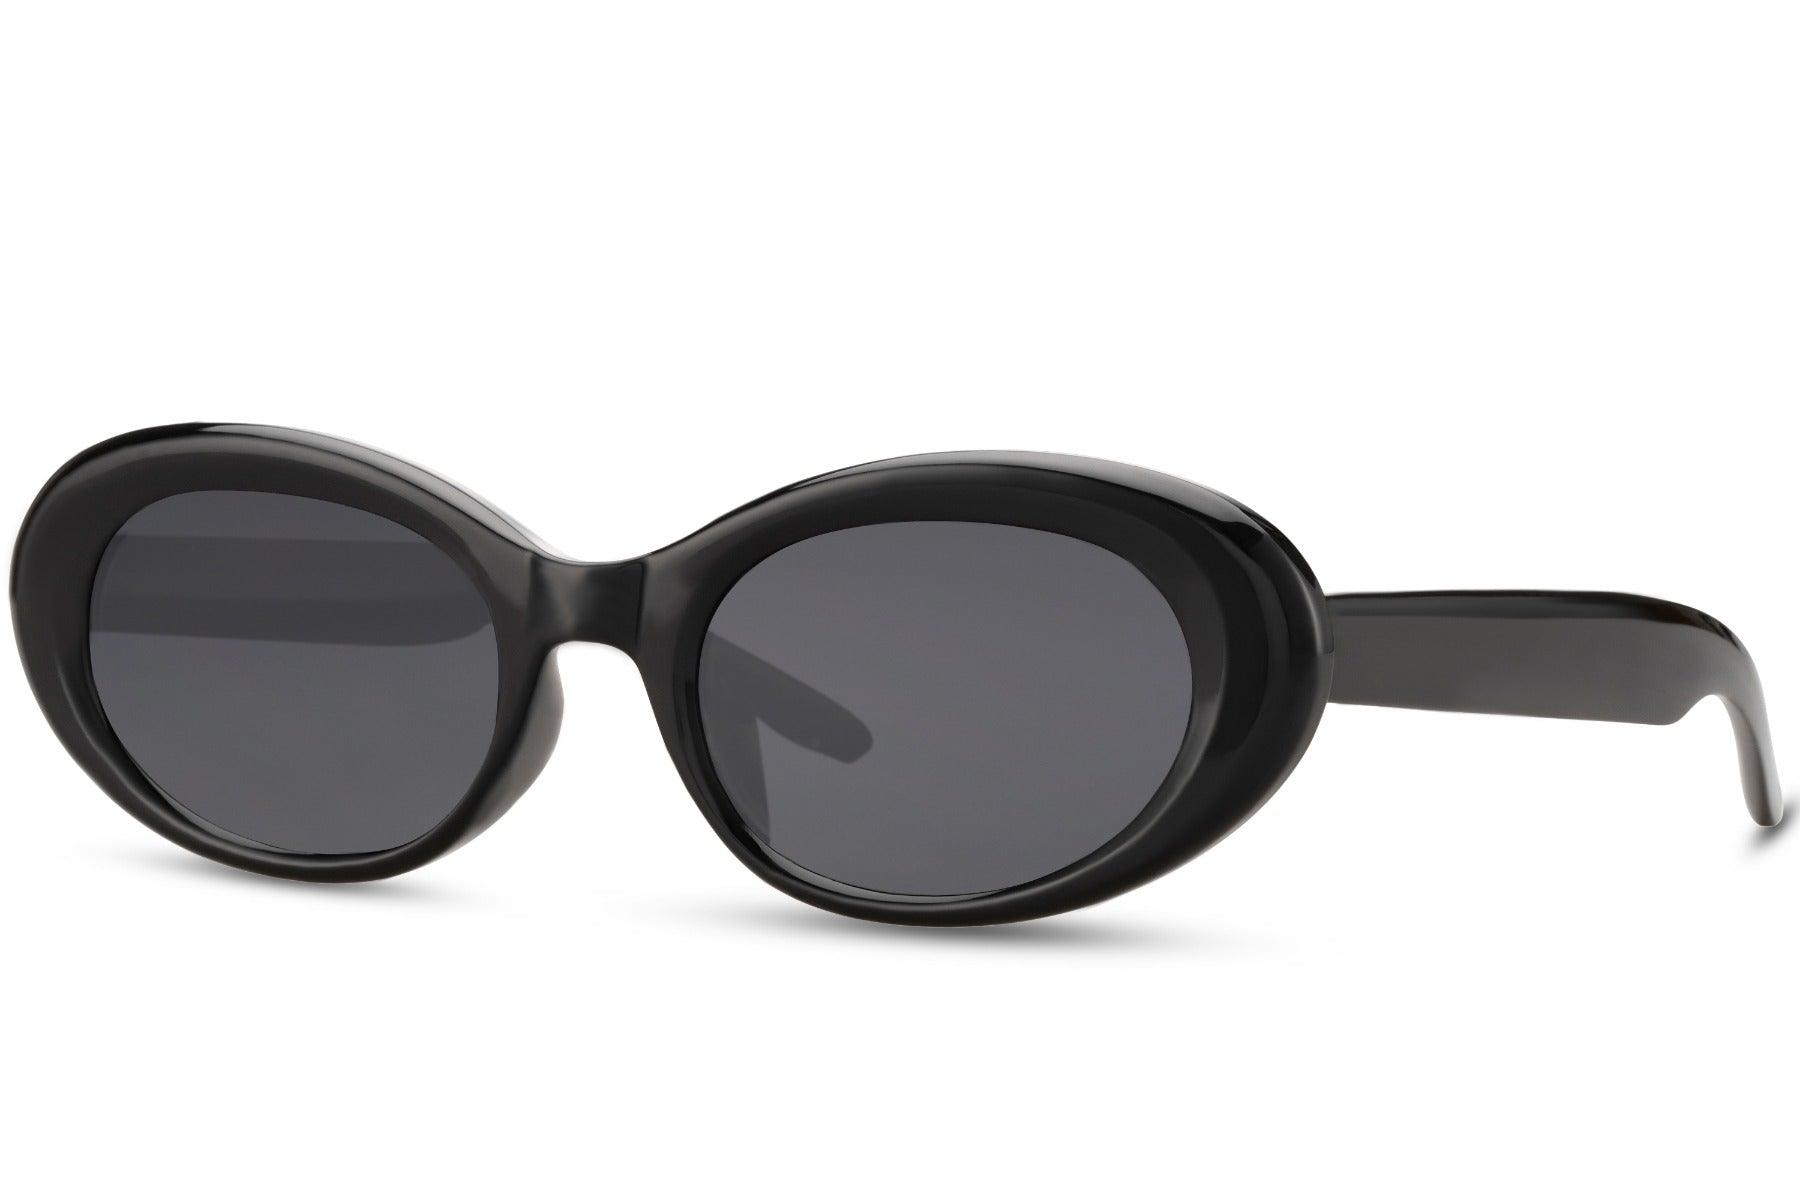 Pulp Black Round Mod Sunglasses - Blissfully Brand  - Circle Retro Funky Girly Oval